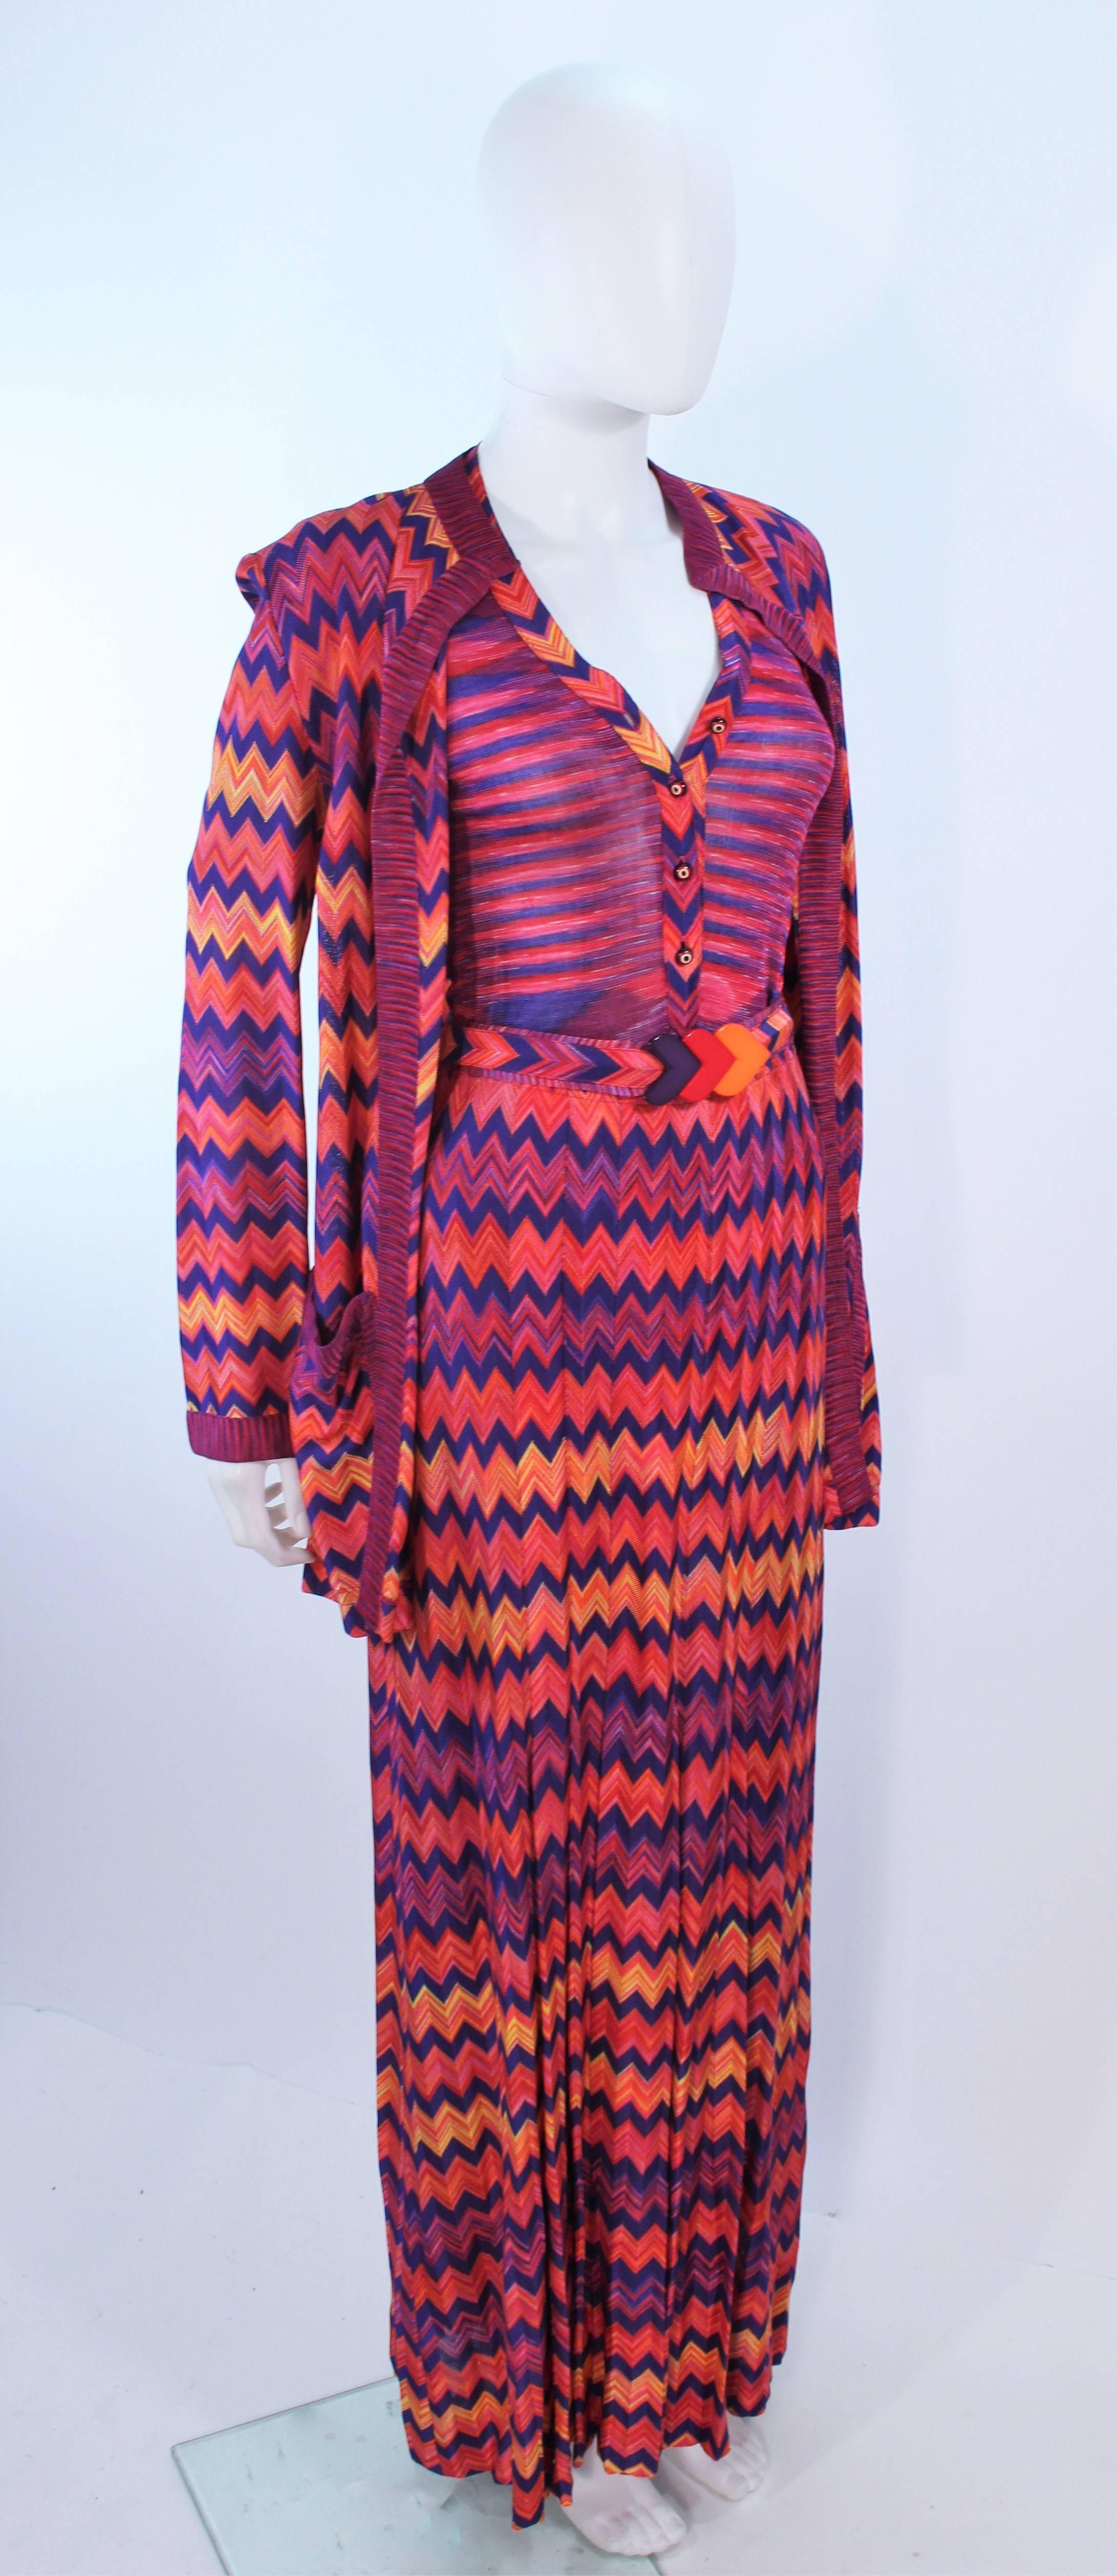 This Missoni design is composed of a orange, purple, and fucshia zig zag knit. Features 5 pieces; an open style cardigan, a short sleeve top with glass buttons, a classic style skirt, and a Bakelite multi-color belt. In excellent vintage condition,